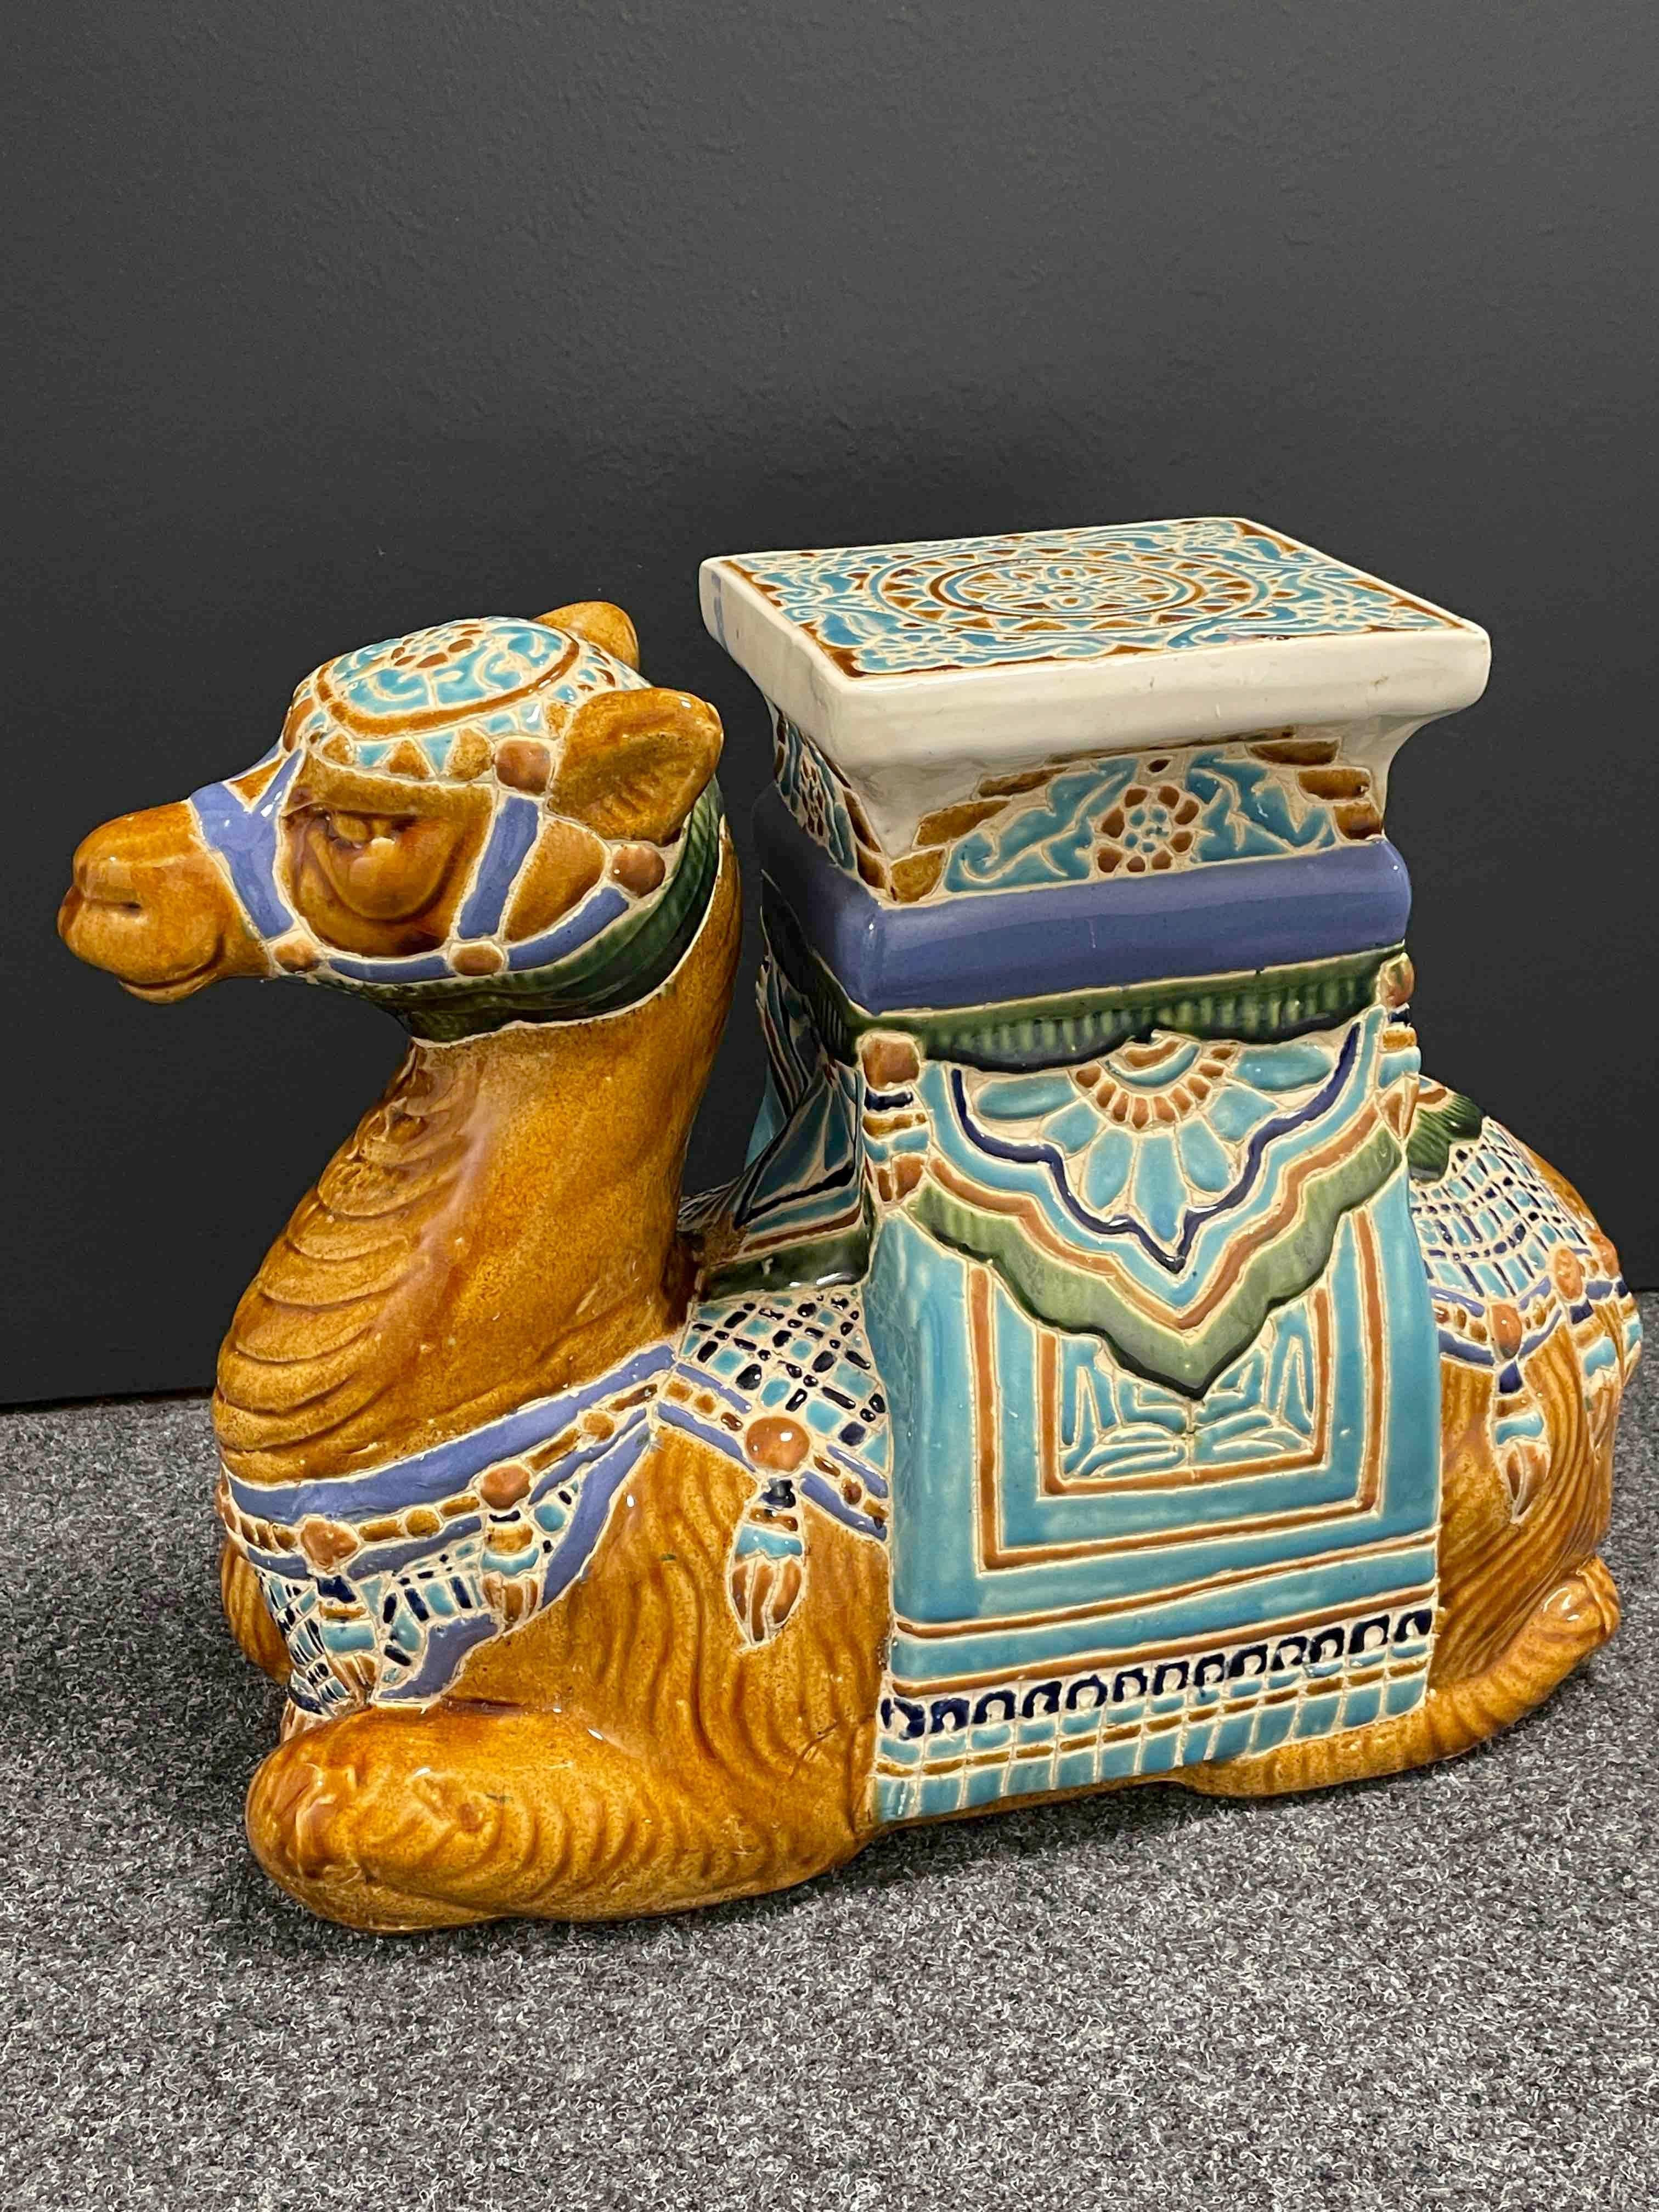 Mid-20th century glazed ceramic camel garden stool, flower pot seat or side table. Handcrafted ceramic. Nice addition to your home, patio or garden area.
     